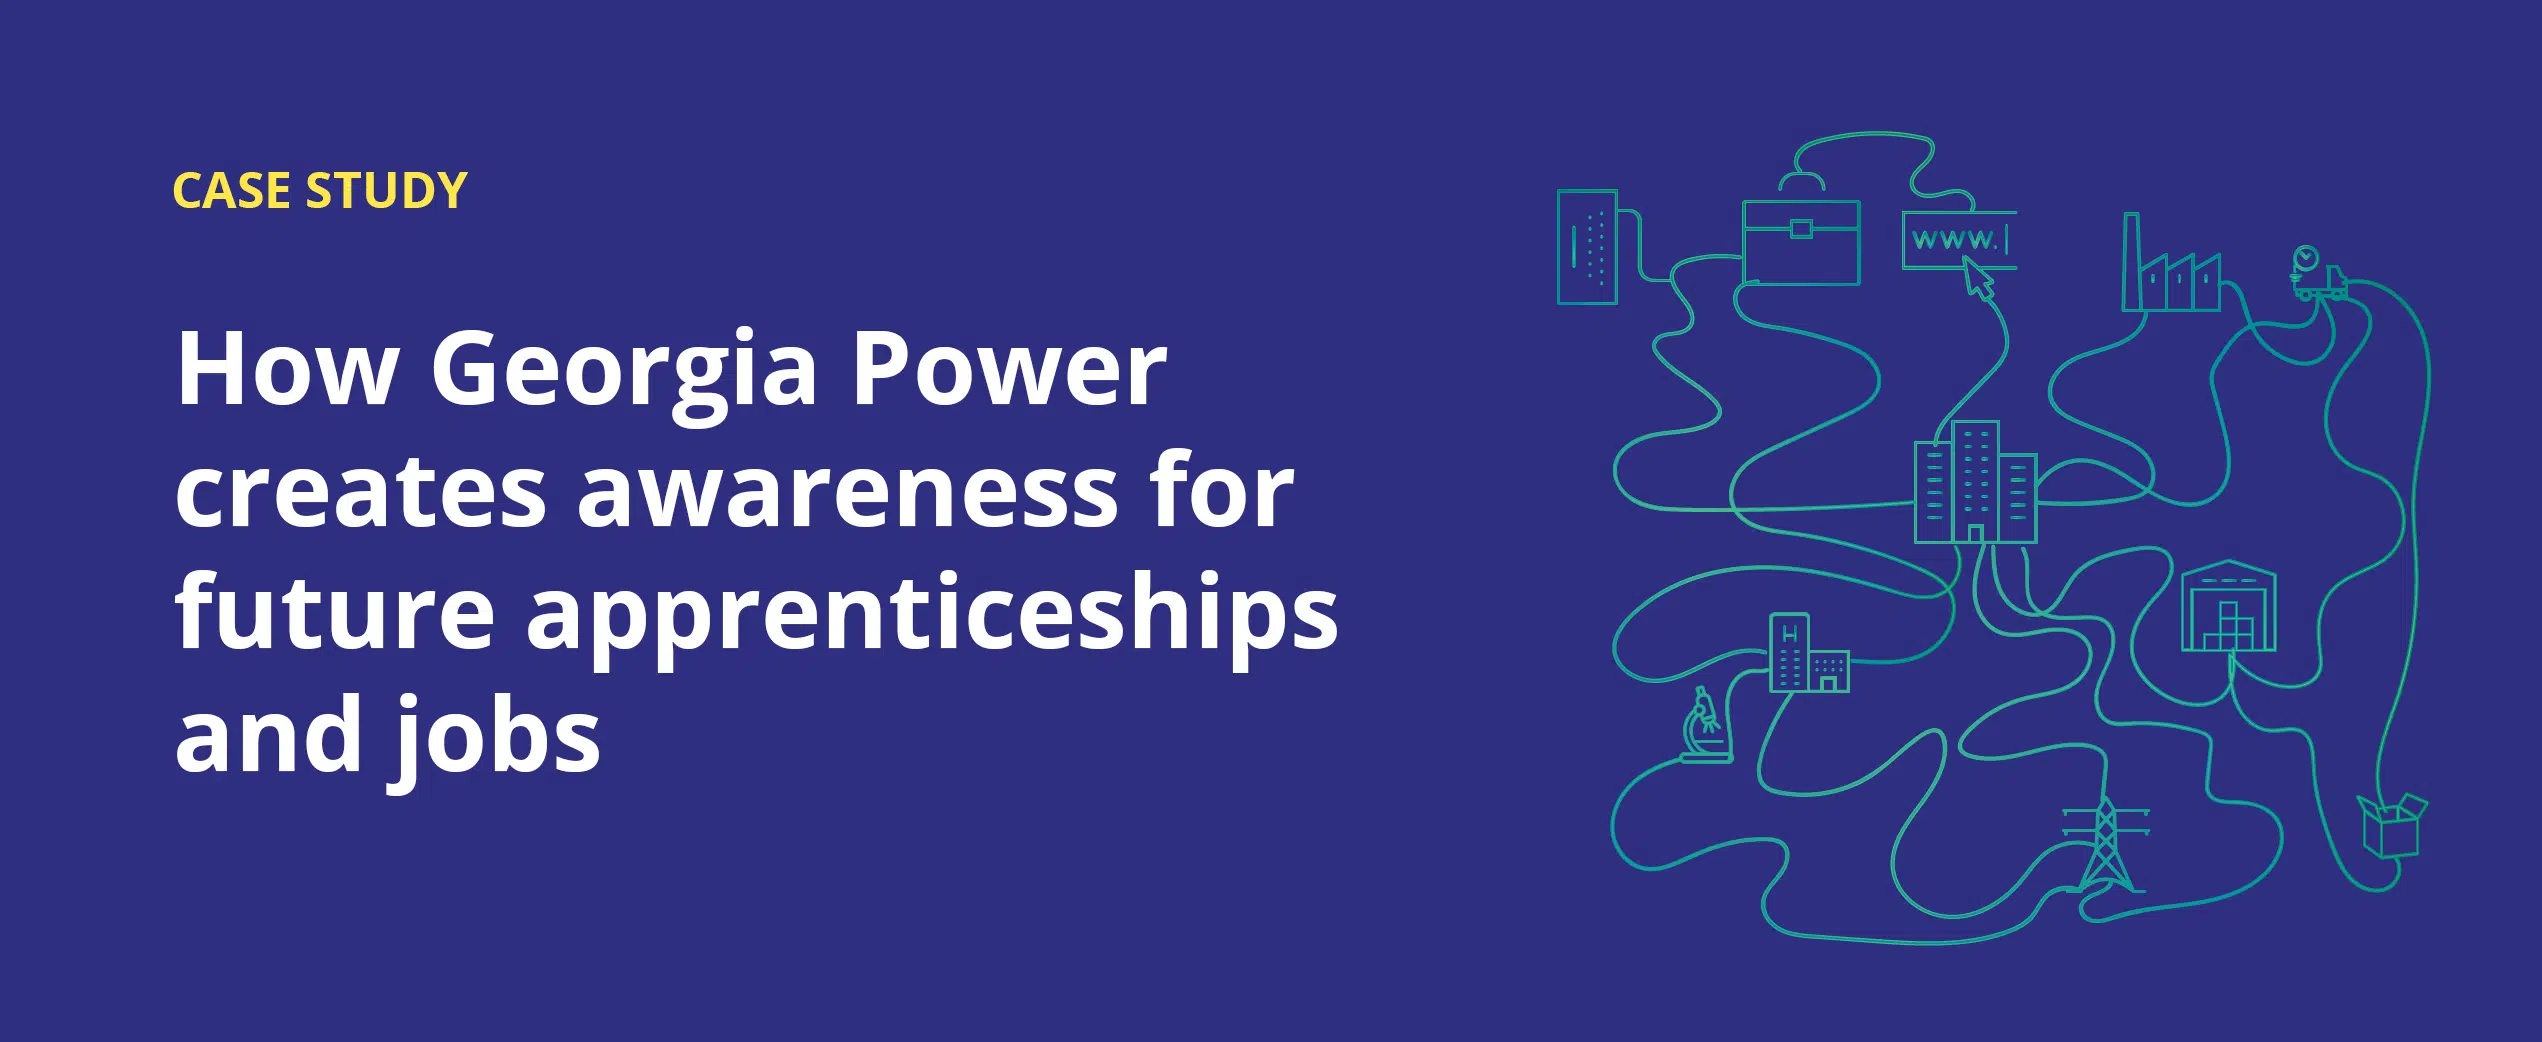 How Georgia Power creates awareness for future apprenticeships and jobs